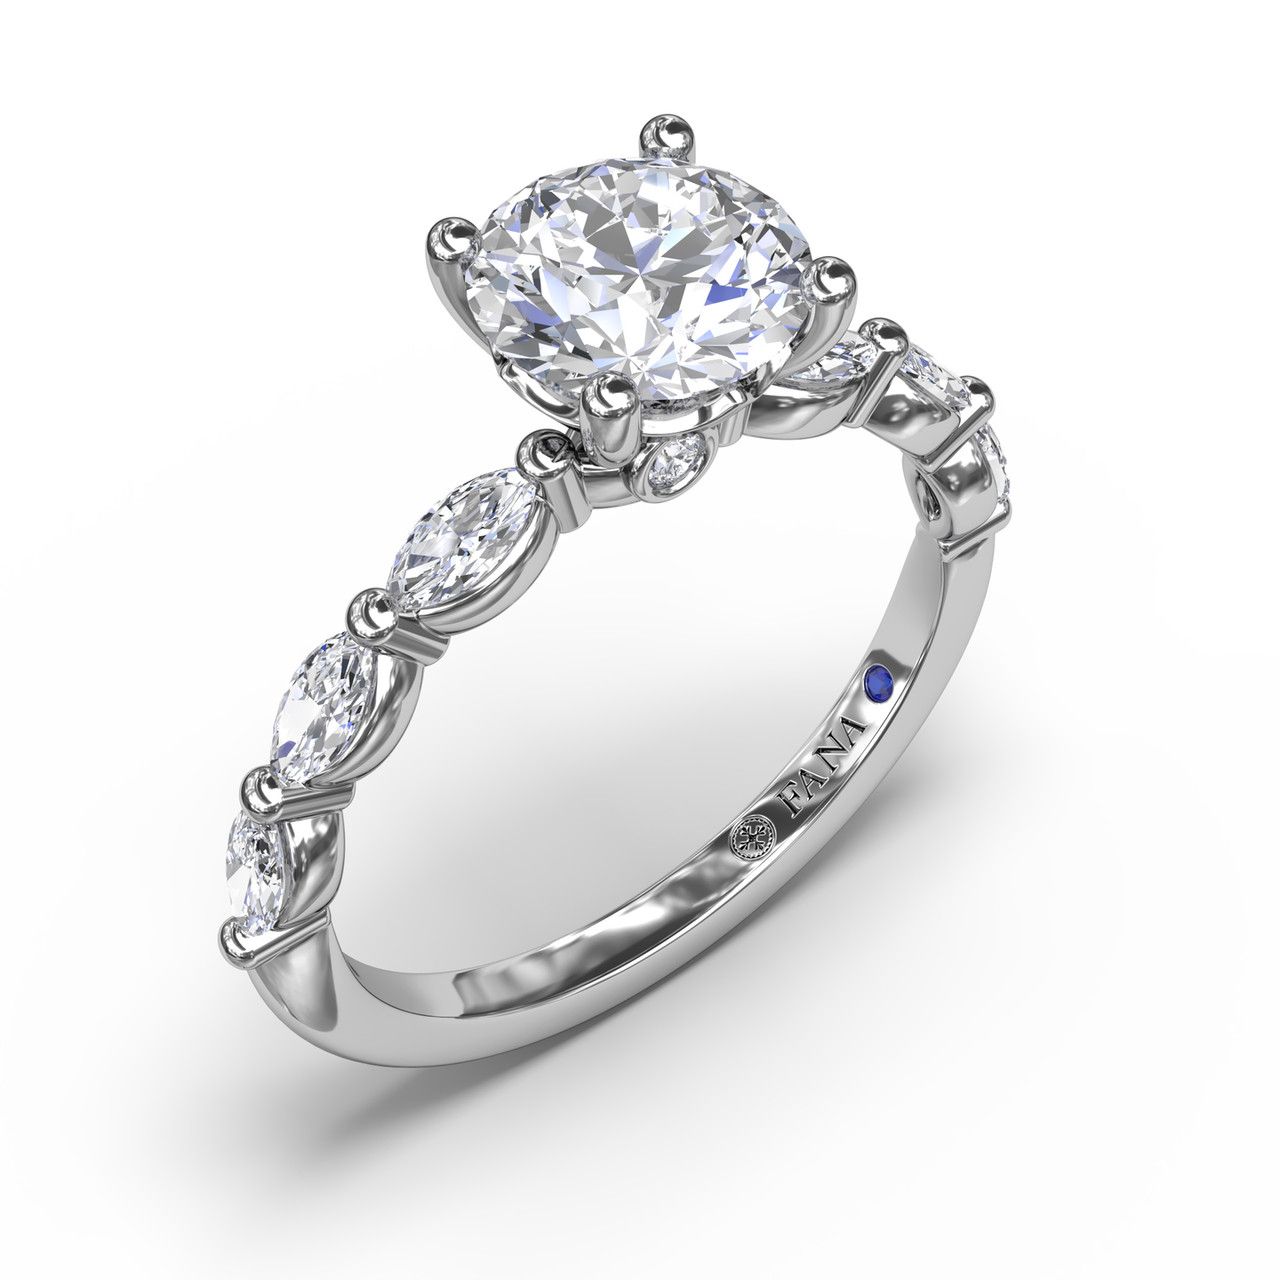 14K WHITE GOLD SHARED PRONG SEMI-MOUNT RING SIZE 6.5 WITH 6=0.61TW MARQUISE G-H VS2-SI1 DIAMONDS AND 2=0.02TW ROUND G-H VS2-SI1 DIAMONDS AND ONE ROUND BLUE SAPPHIRE   (2.61 GRAMS)